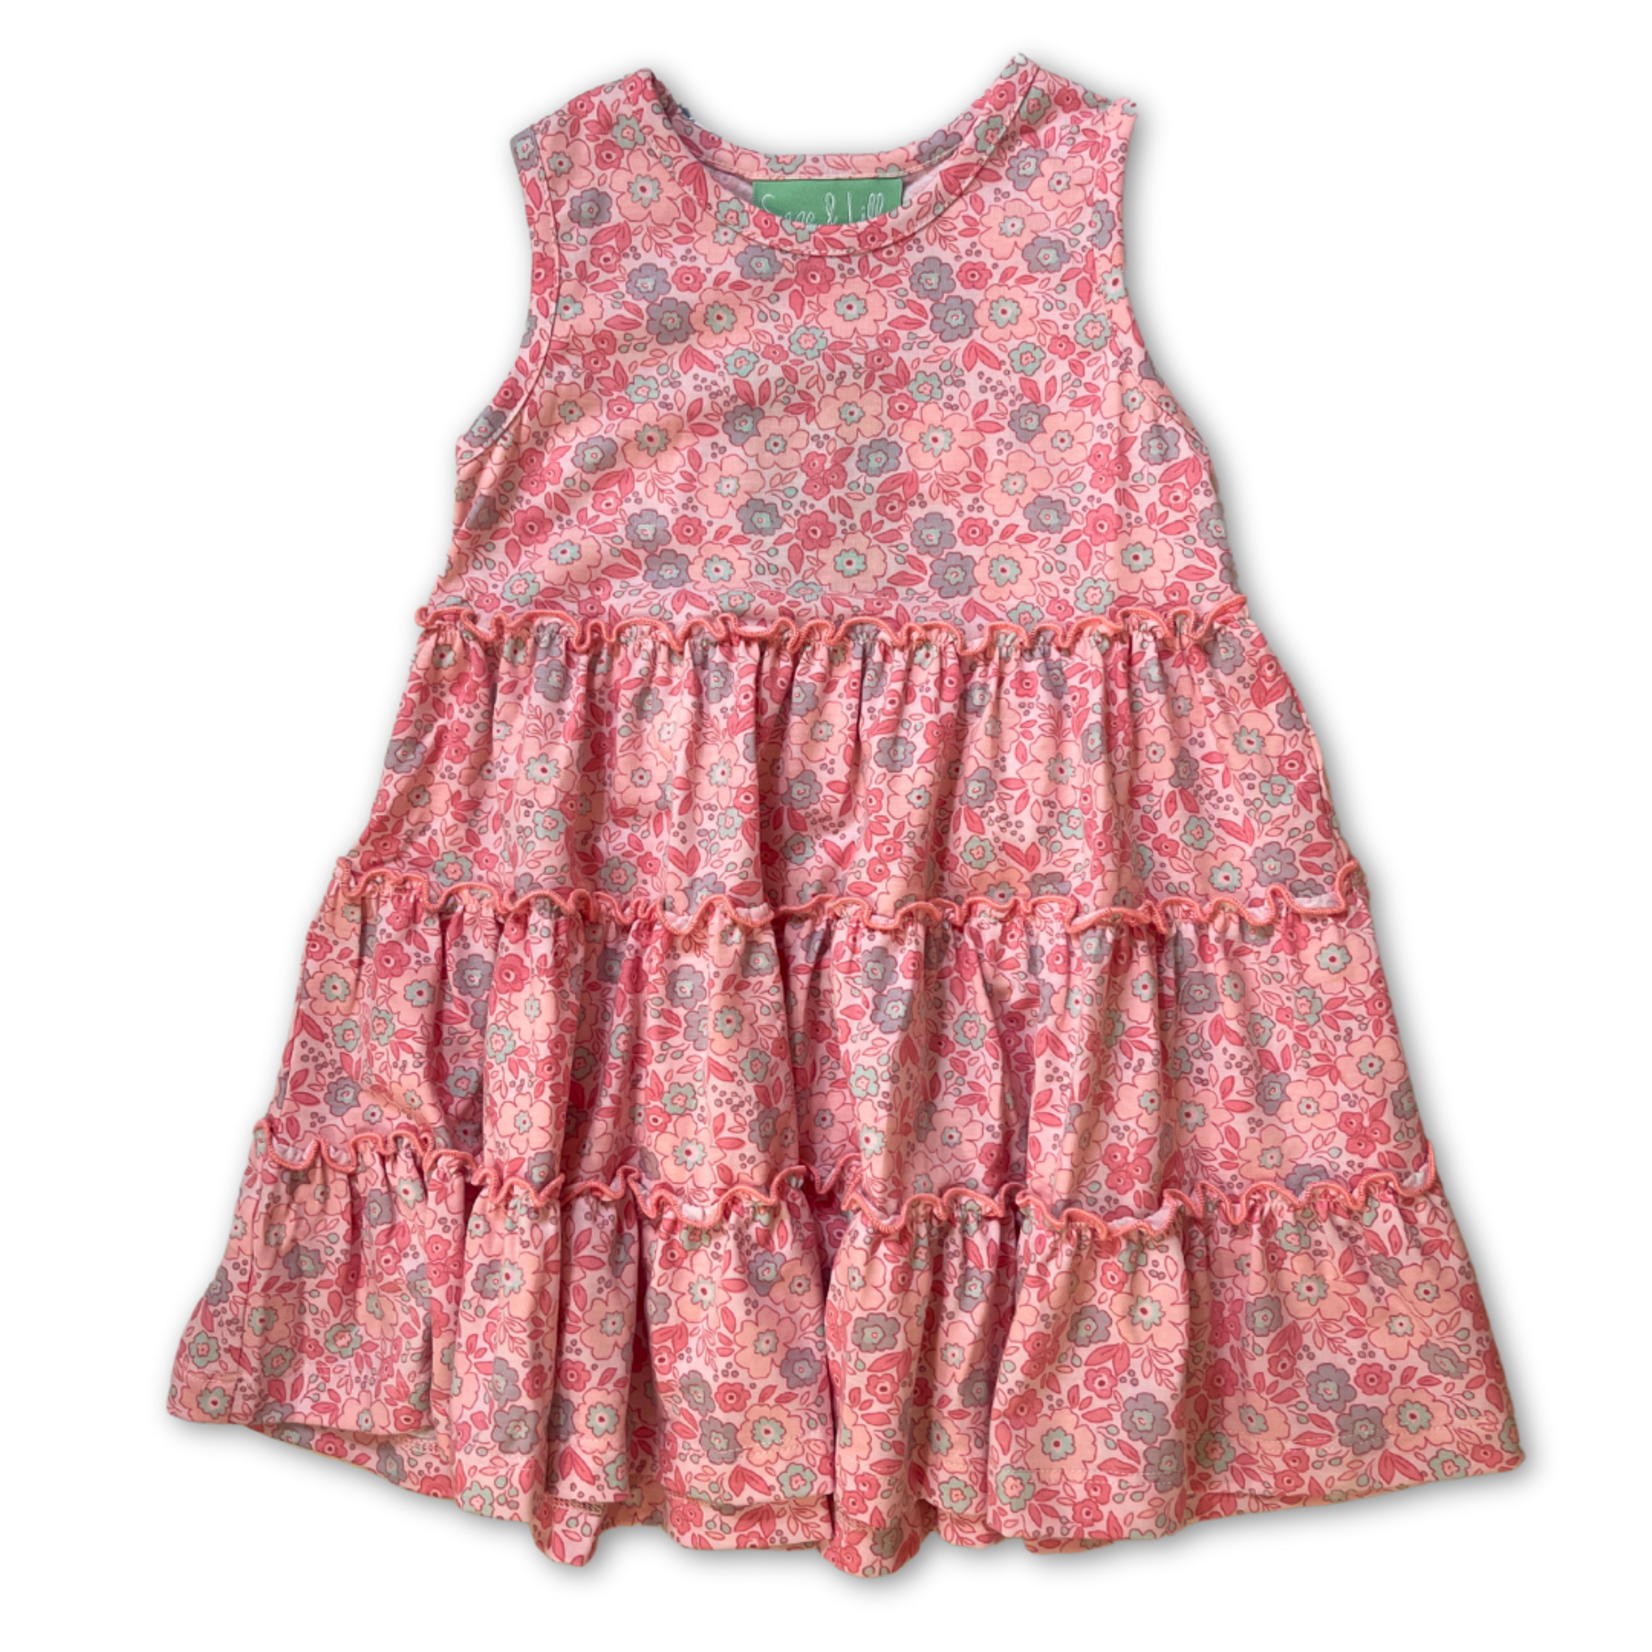 Sage & Lilly Pink Floral Tier Dress